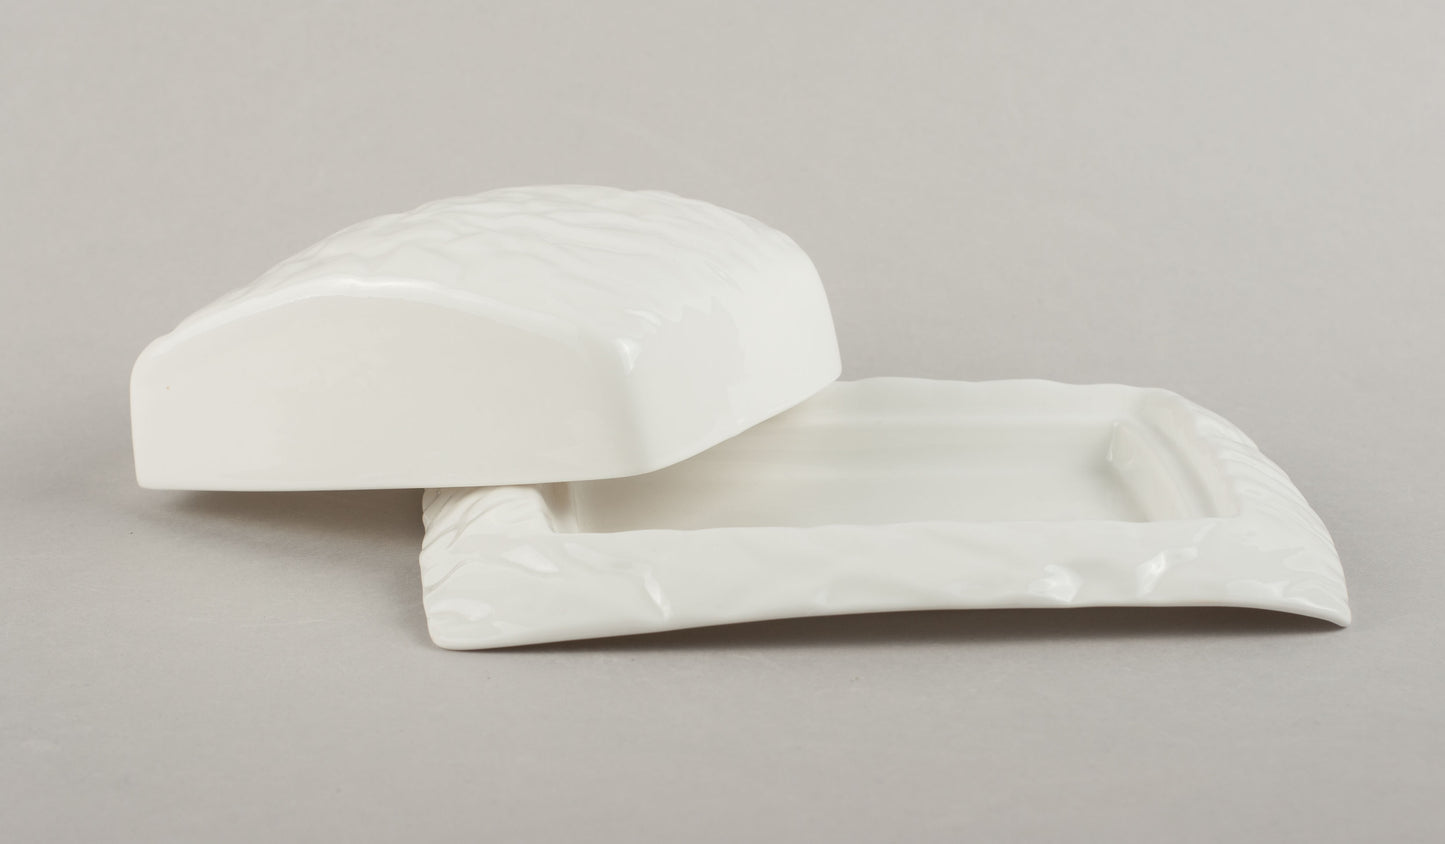 Porcelain Crumpled Butter Container